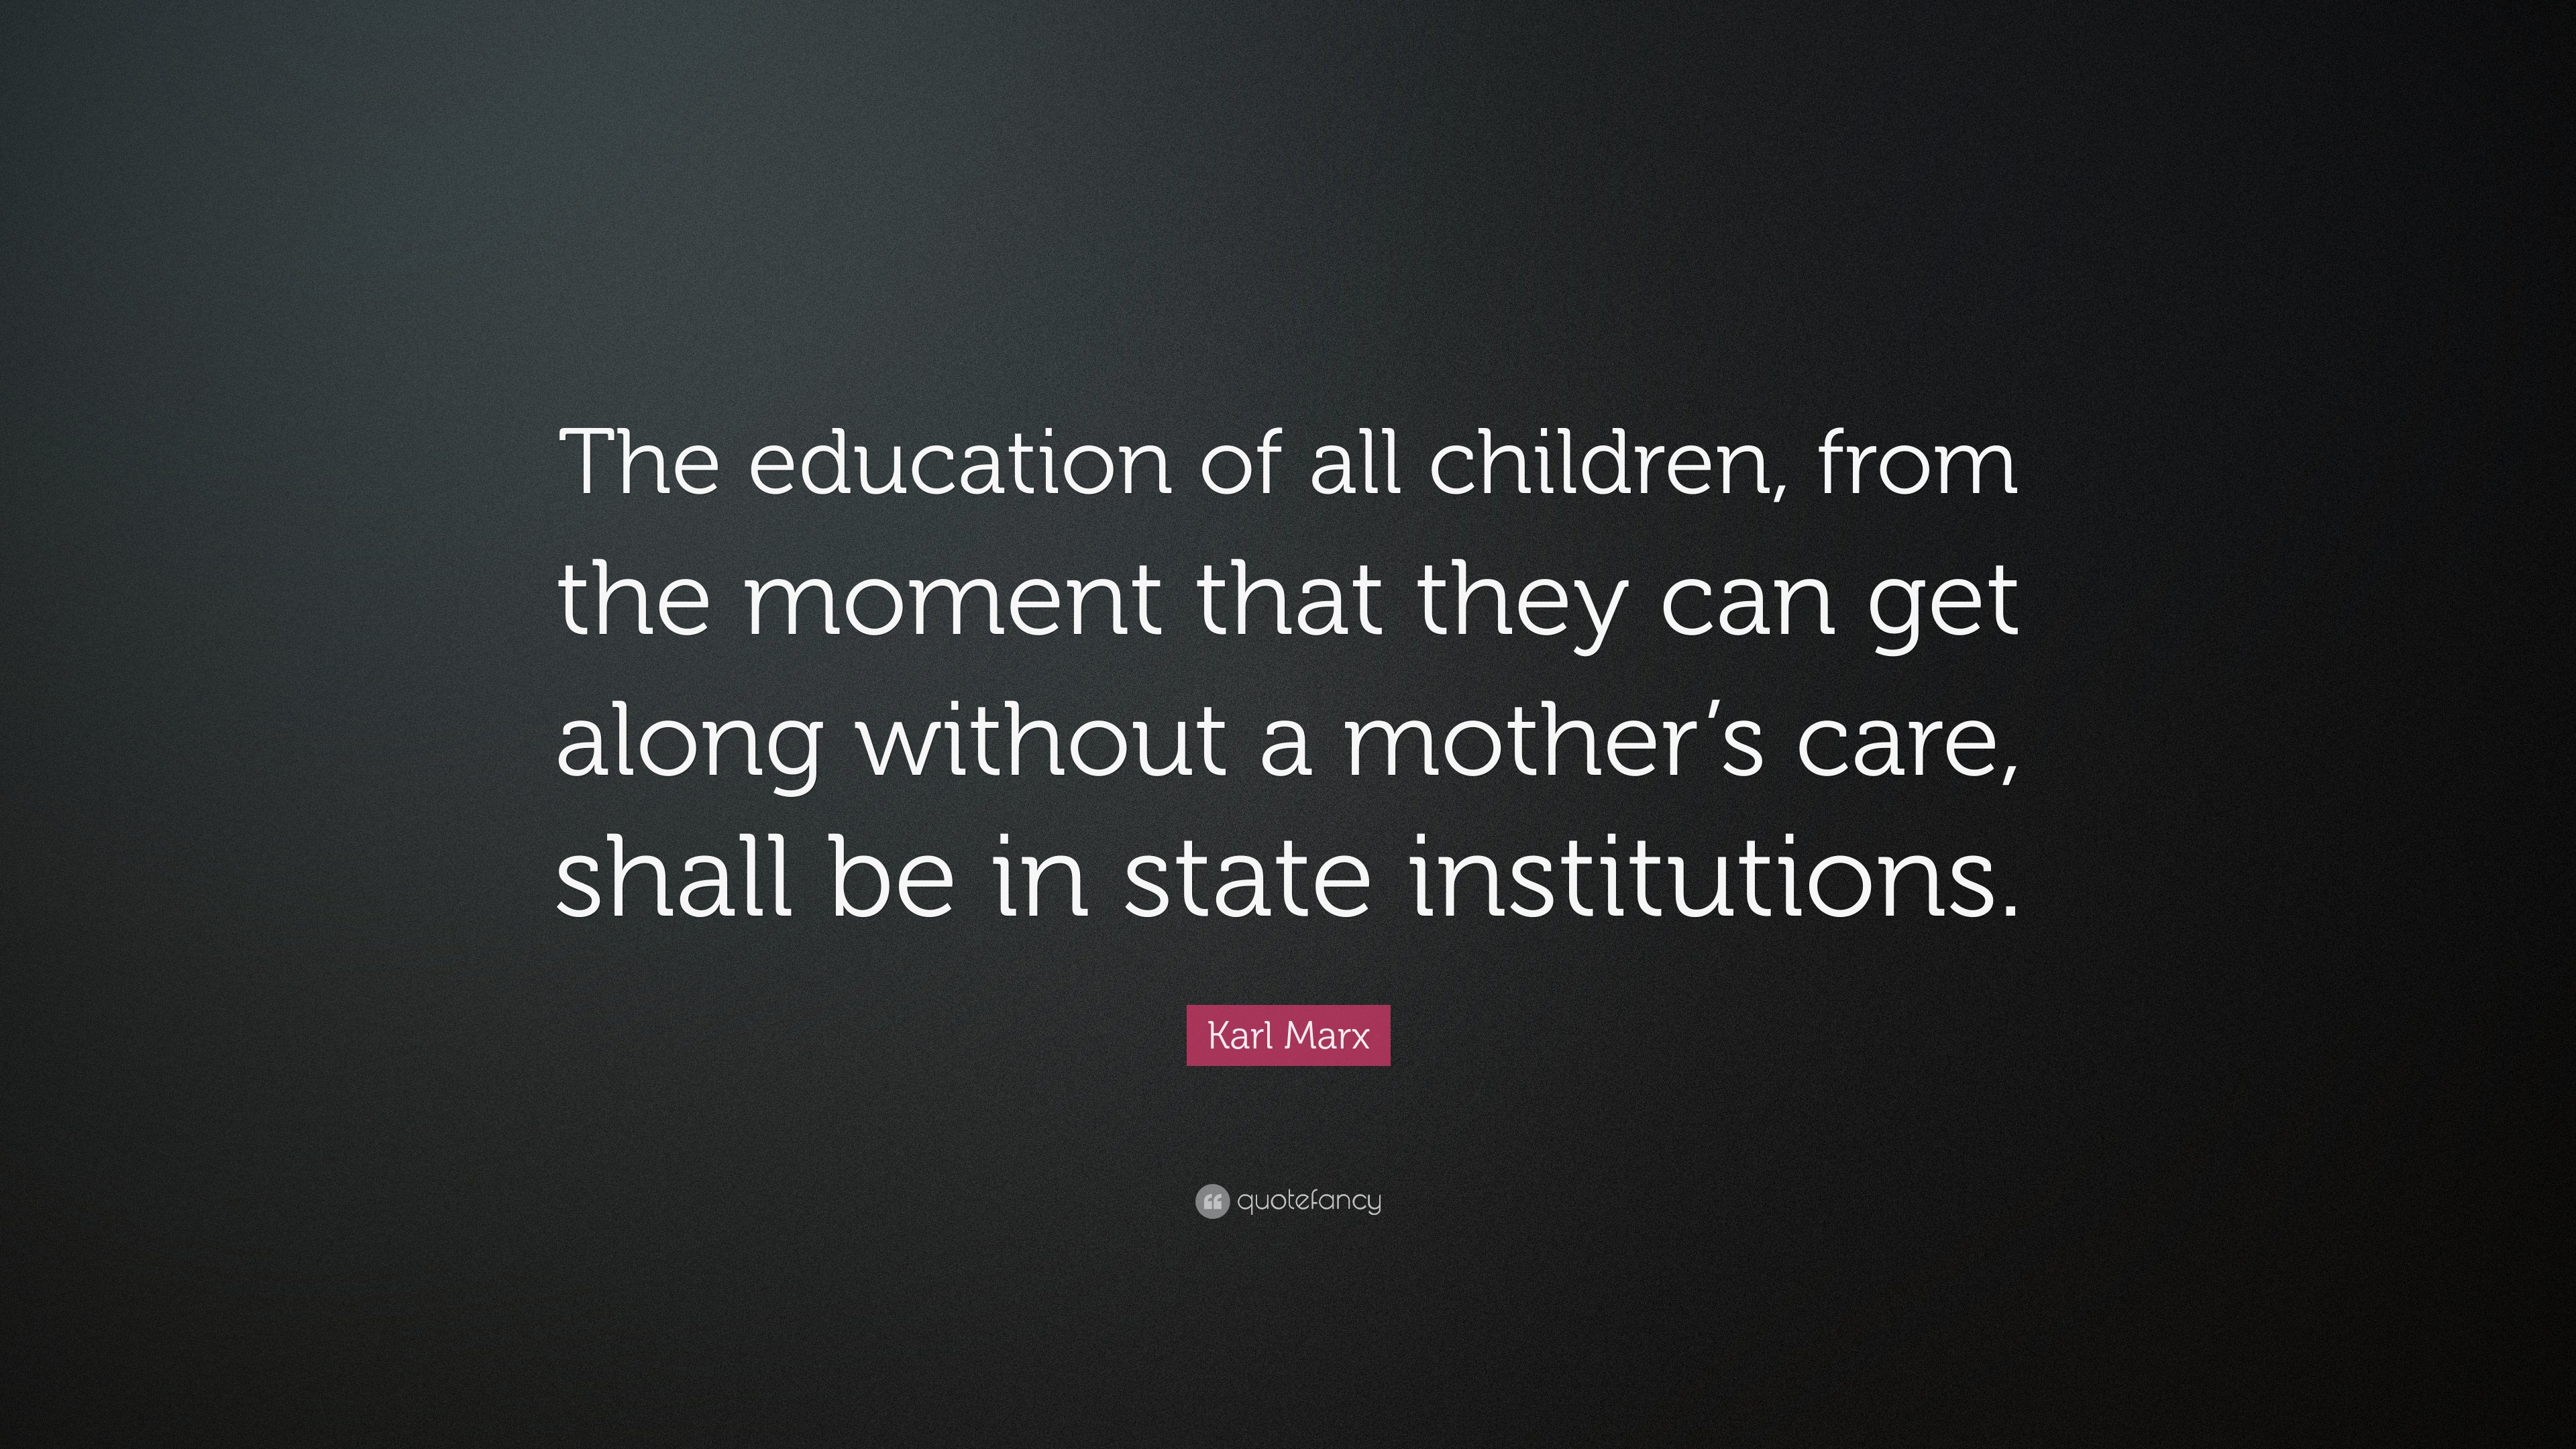 karl marx quotes on education